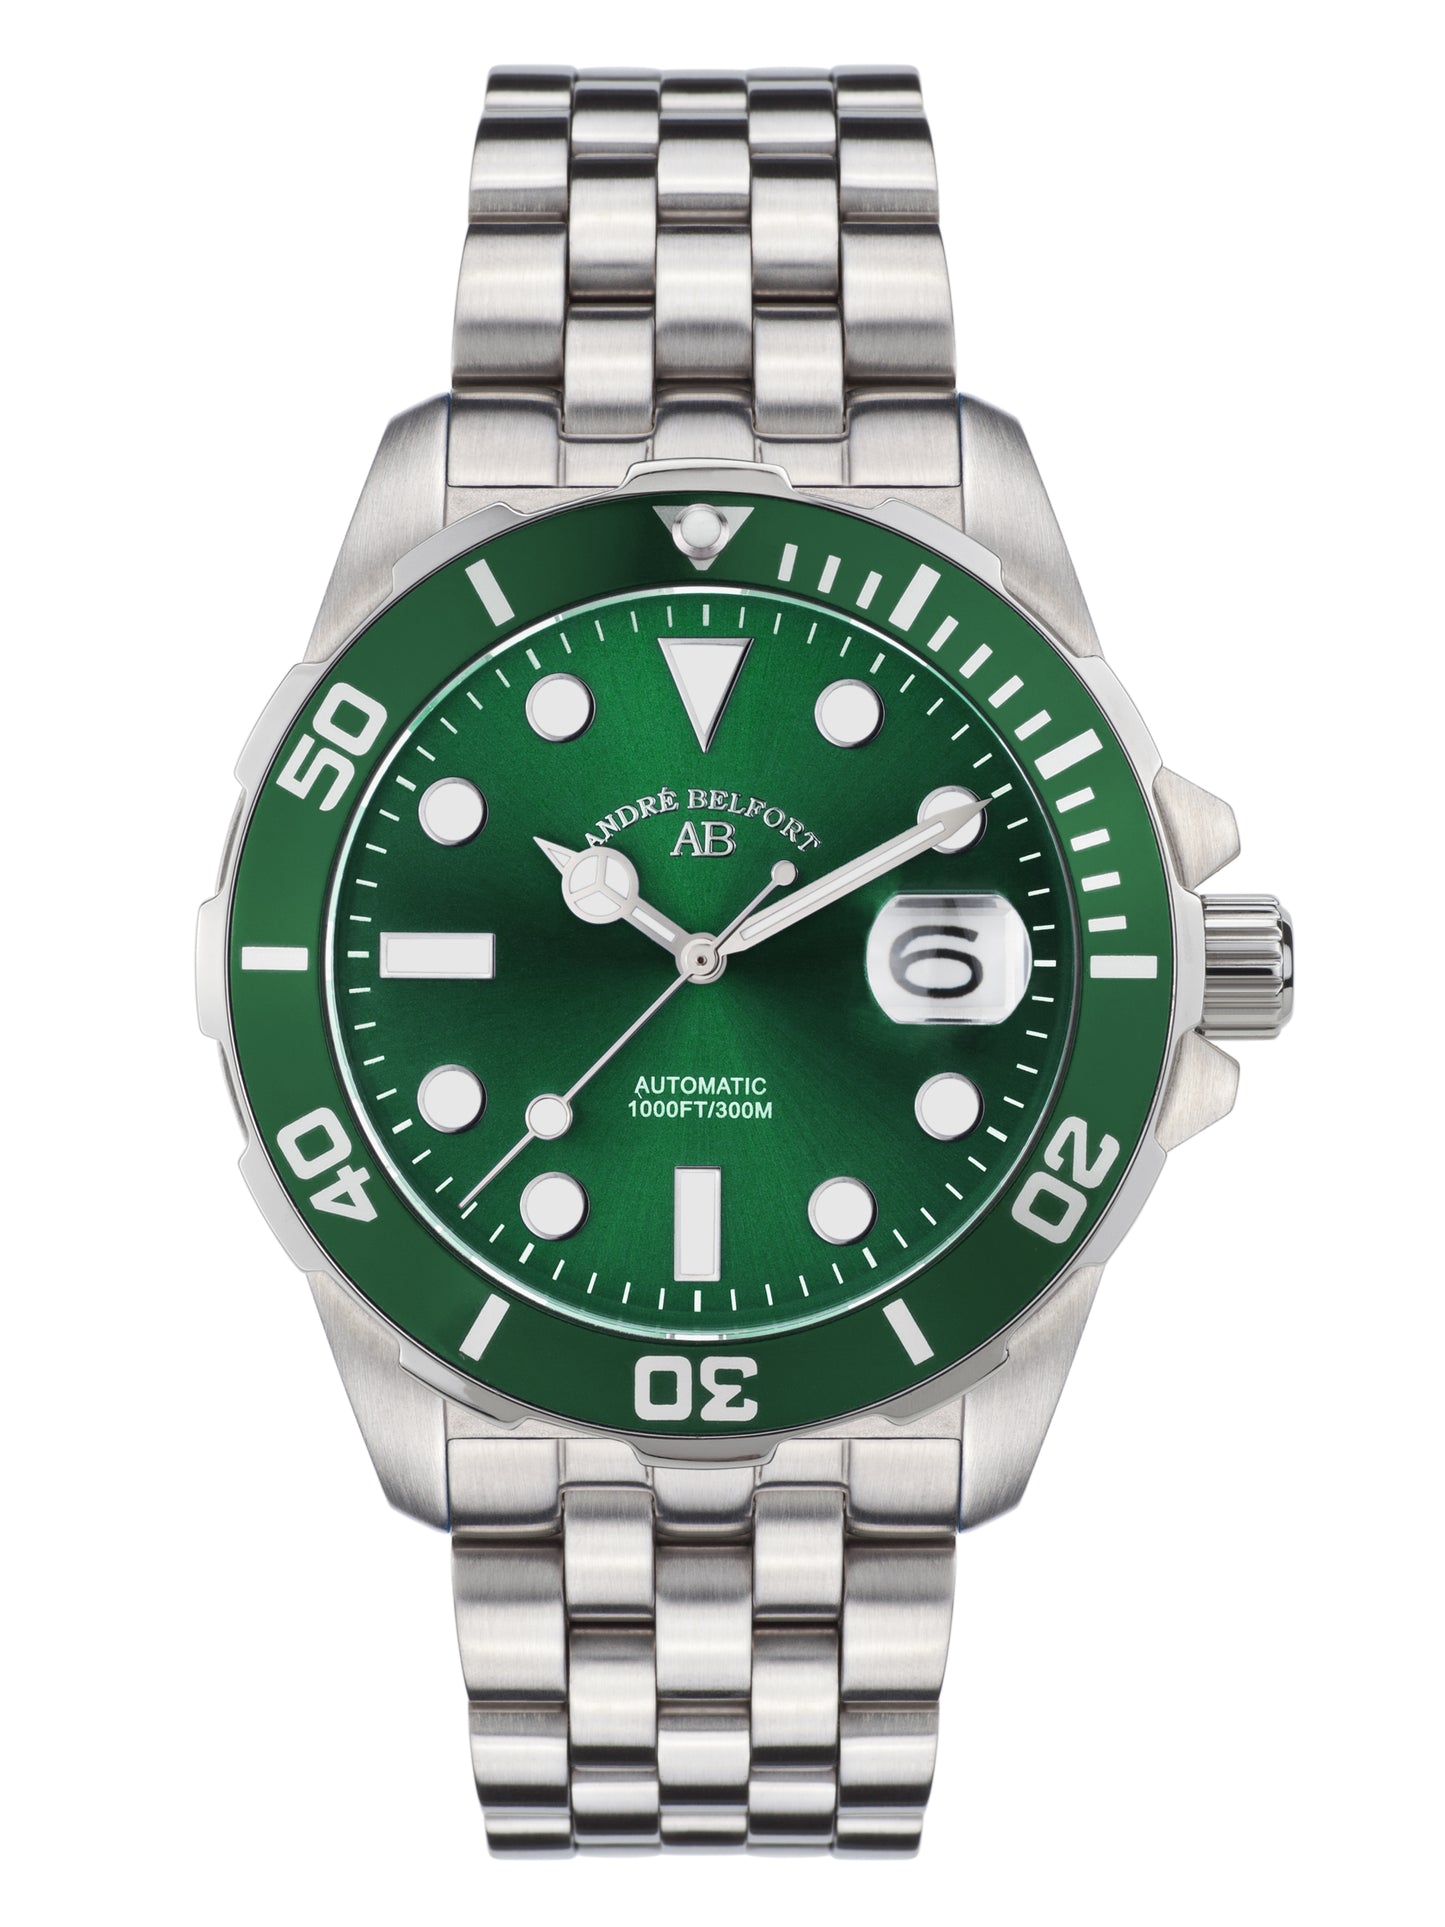 Automatic watches — Sous les mers — André Belfort — steel green